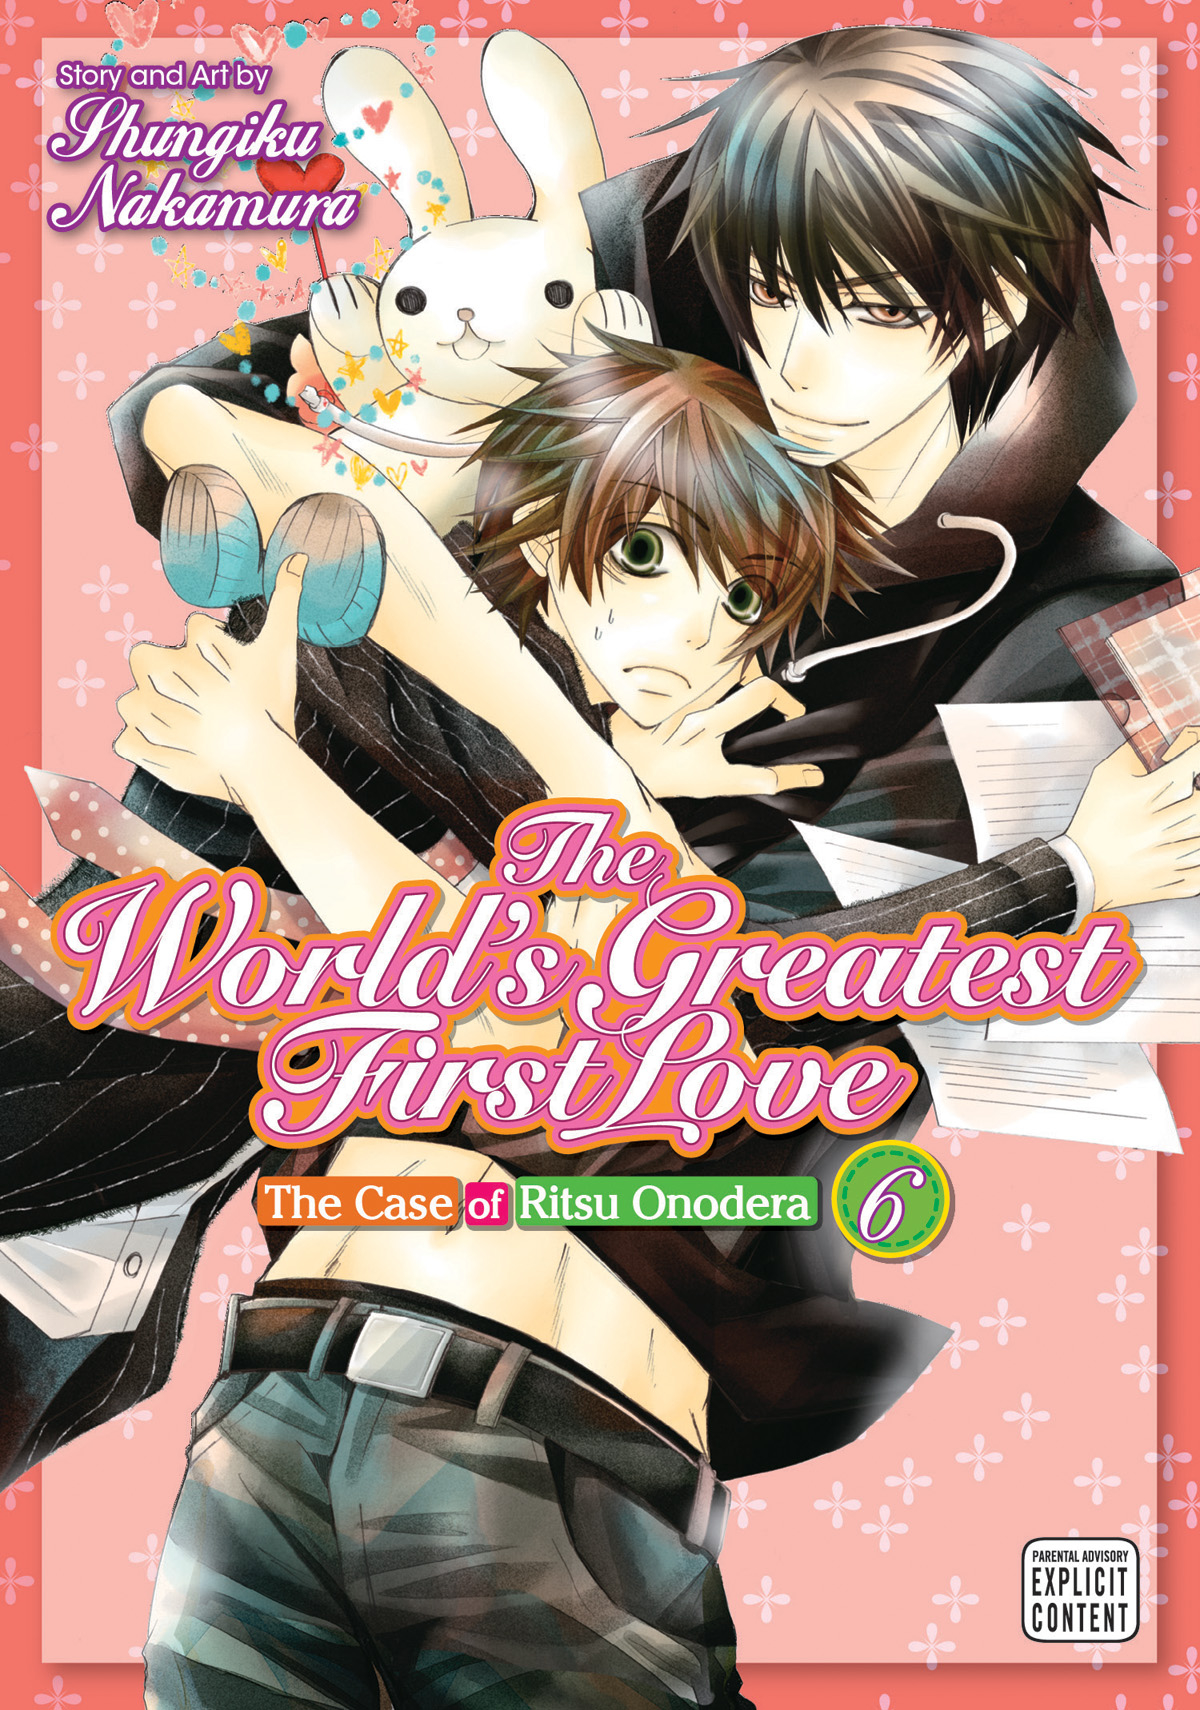 The World's Greatest First Love, Vol. 16, Book by Shungiku Nakamura, Official Publisher Page